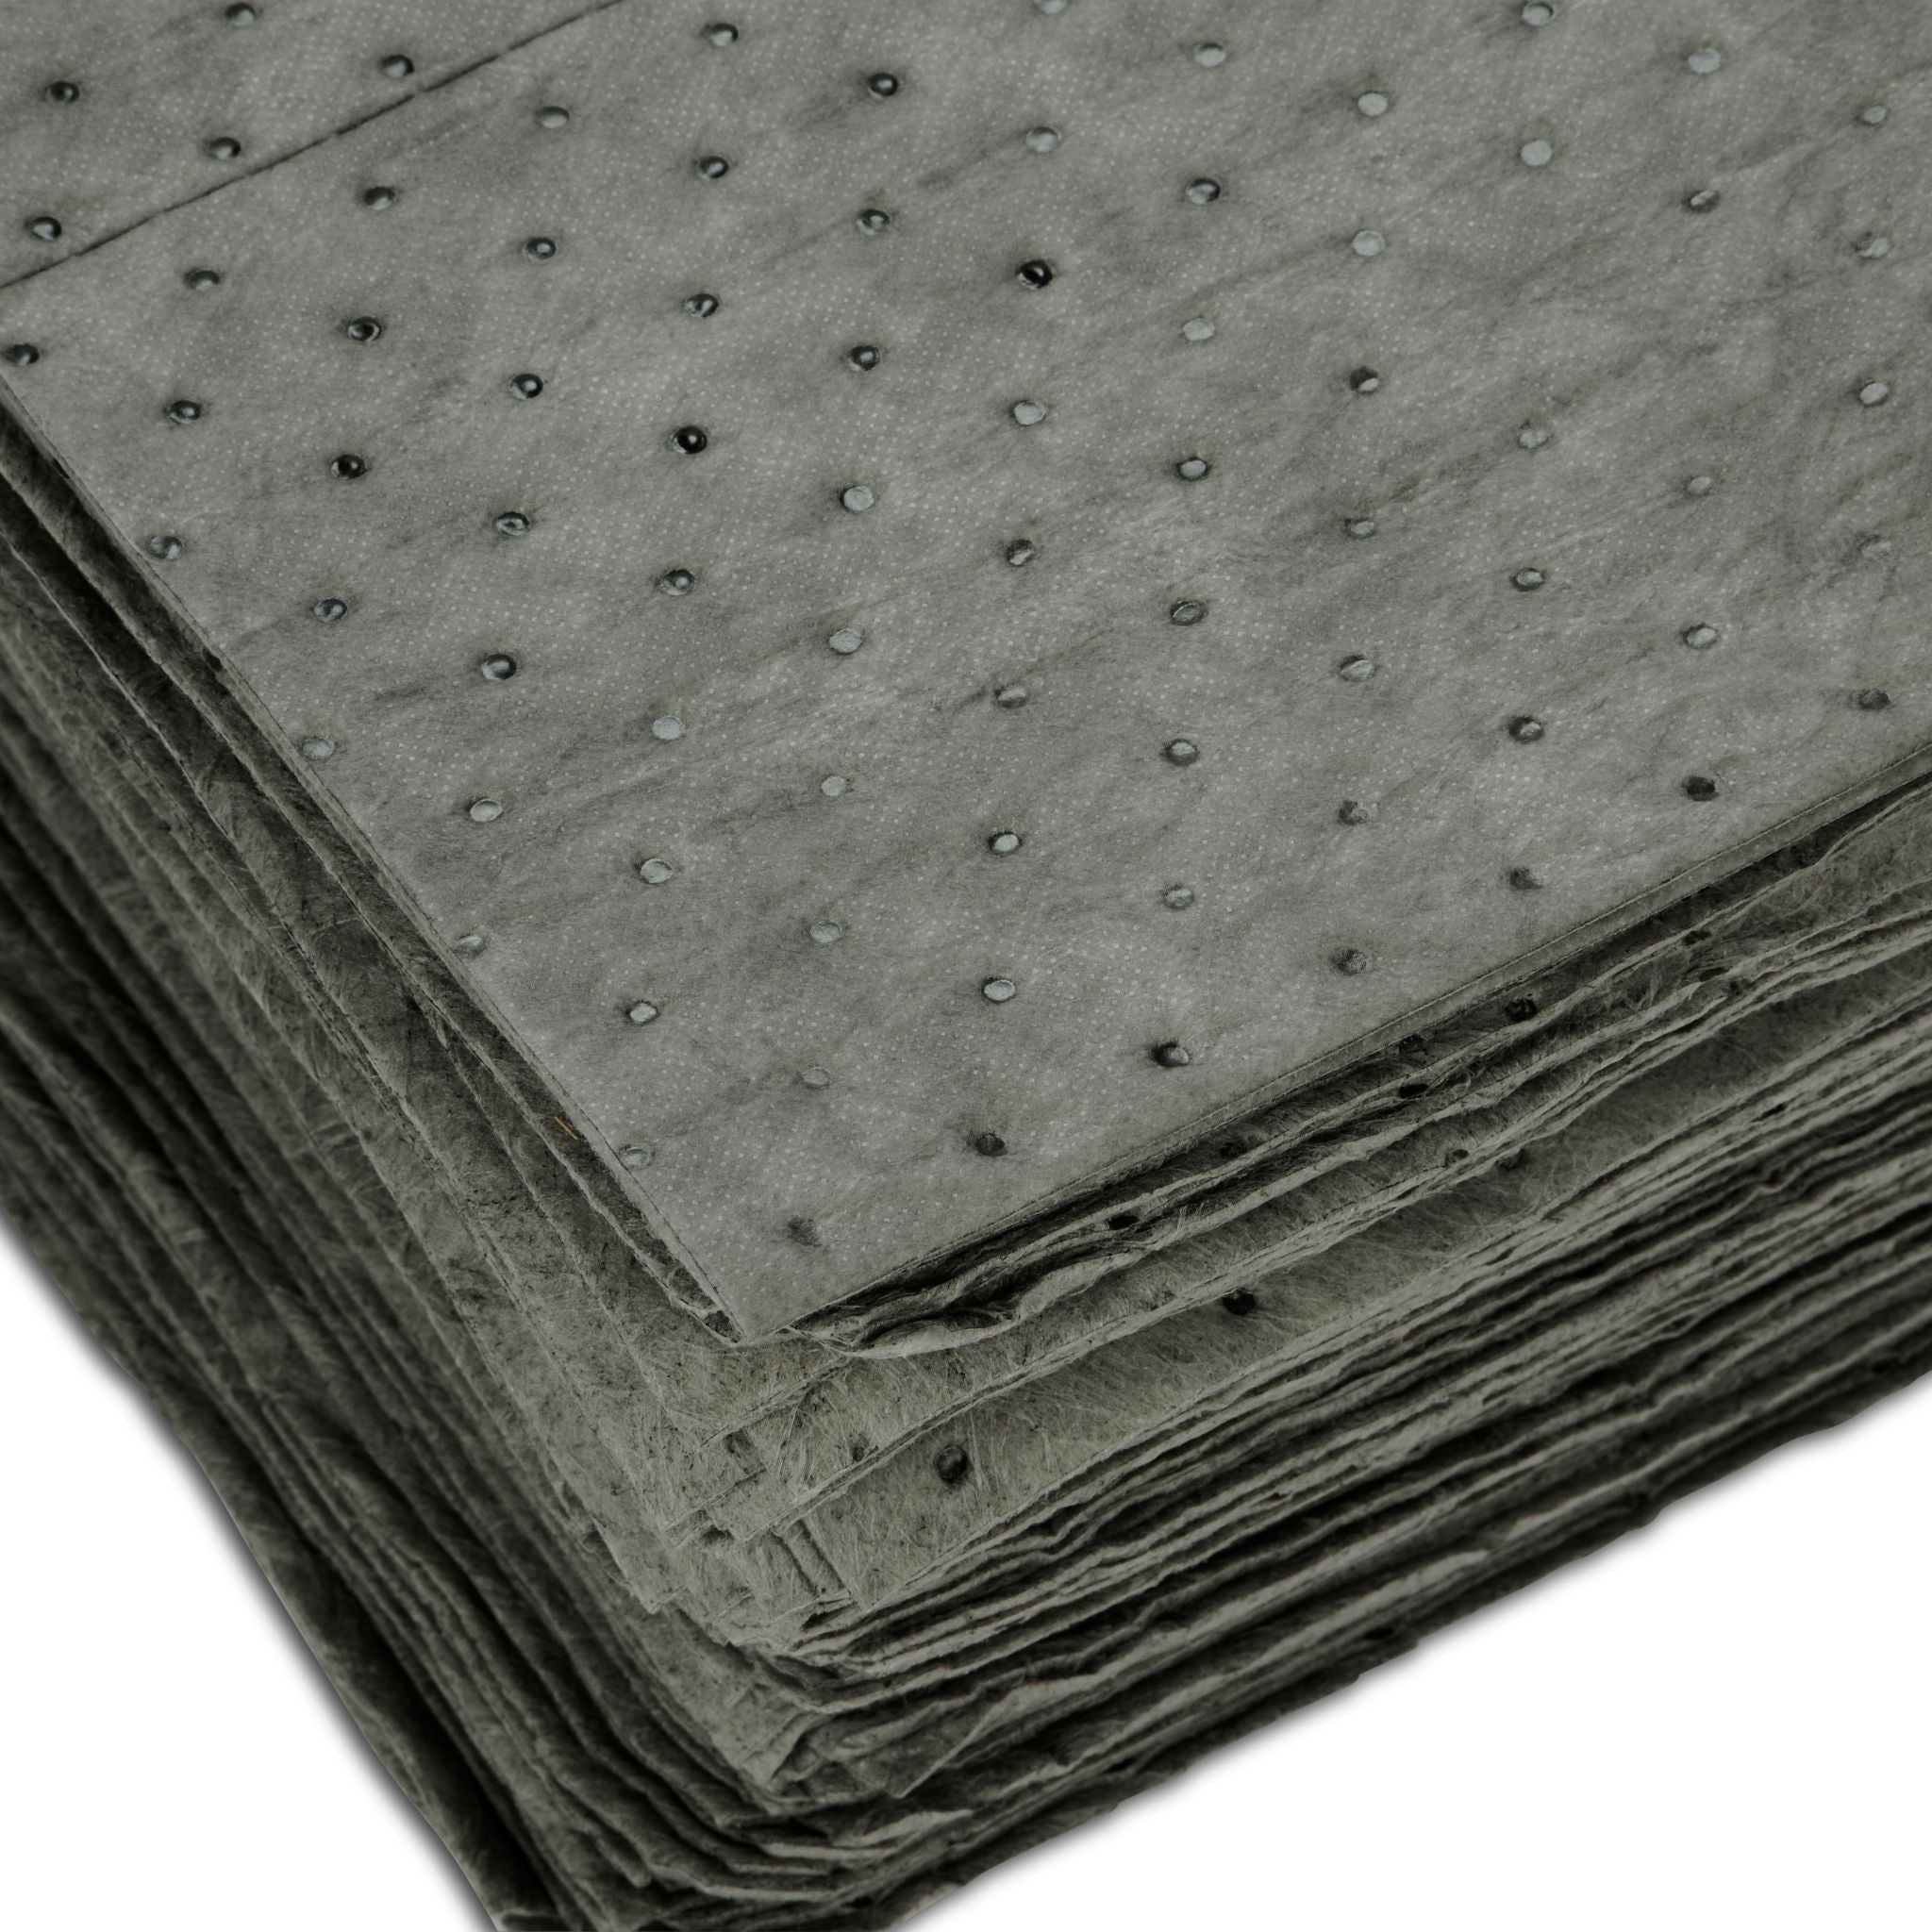 AABACO Universal Gray Dimpled MEDIUM Weight Pads – 15”x 18” (100/bale)